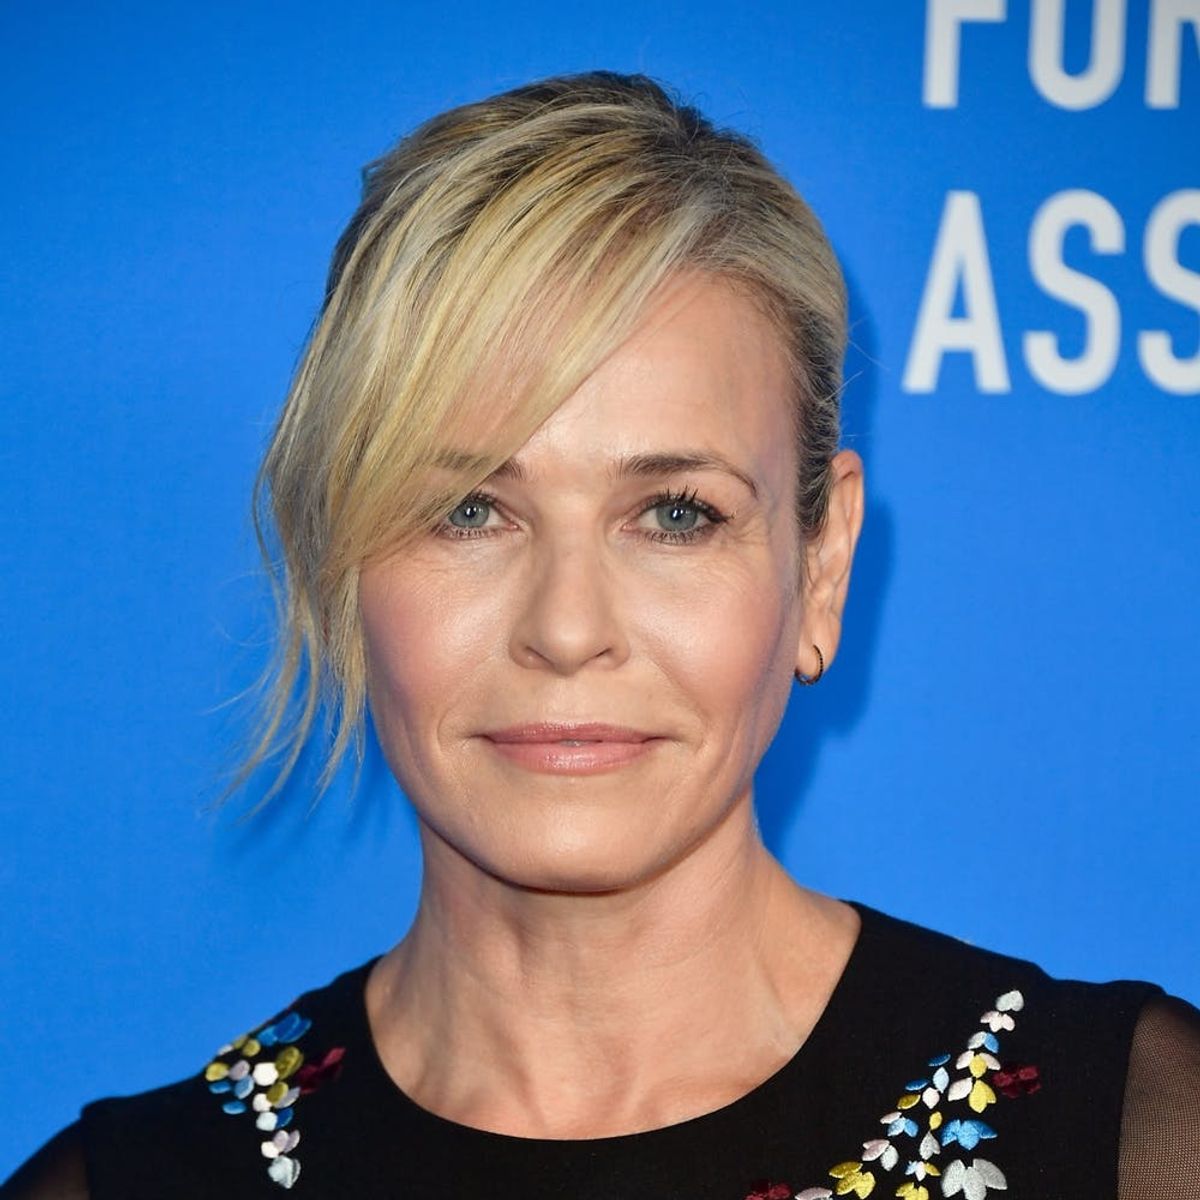 Chelsea Handler Is Leaving Her Netflix Show to Help “Elect More Women to Public Office”